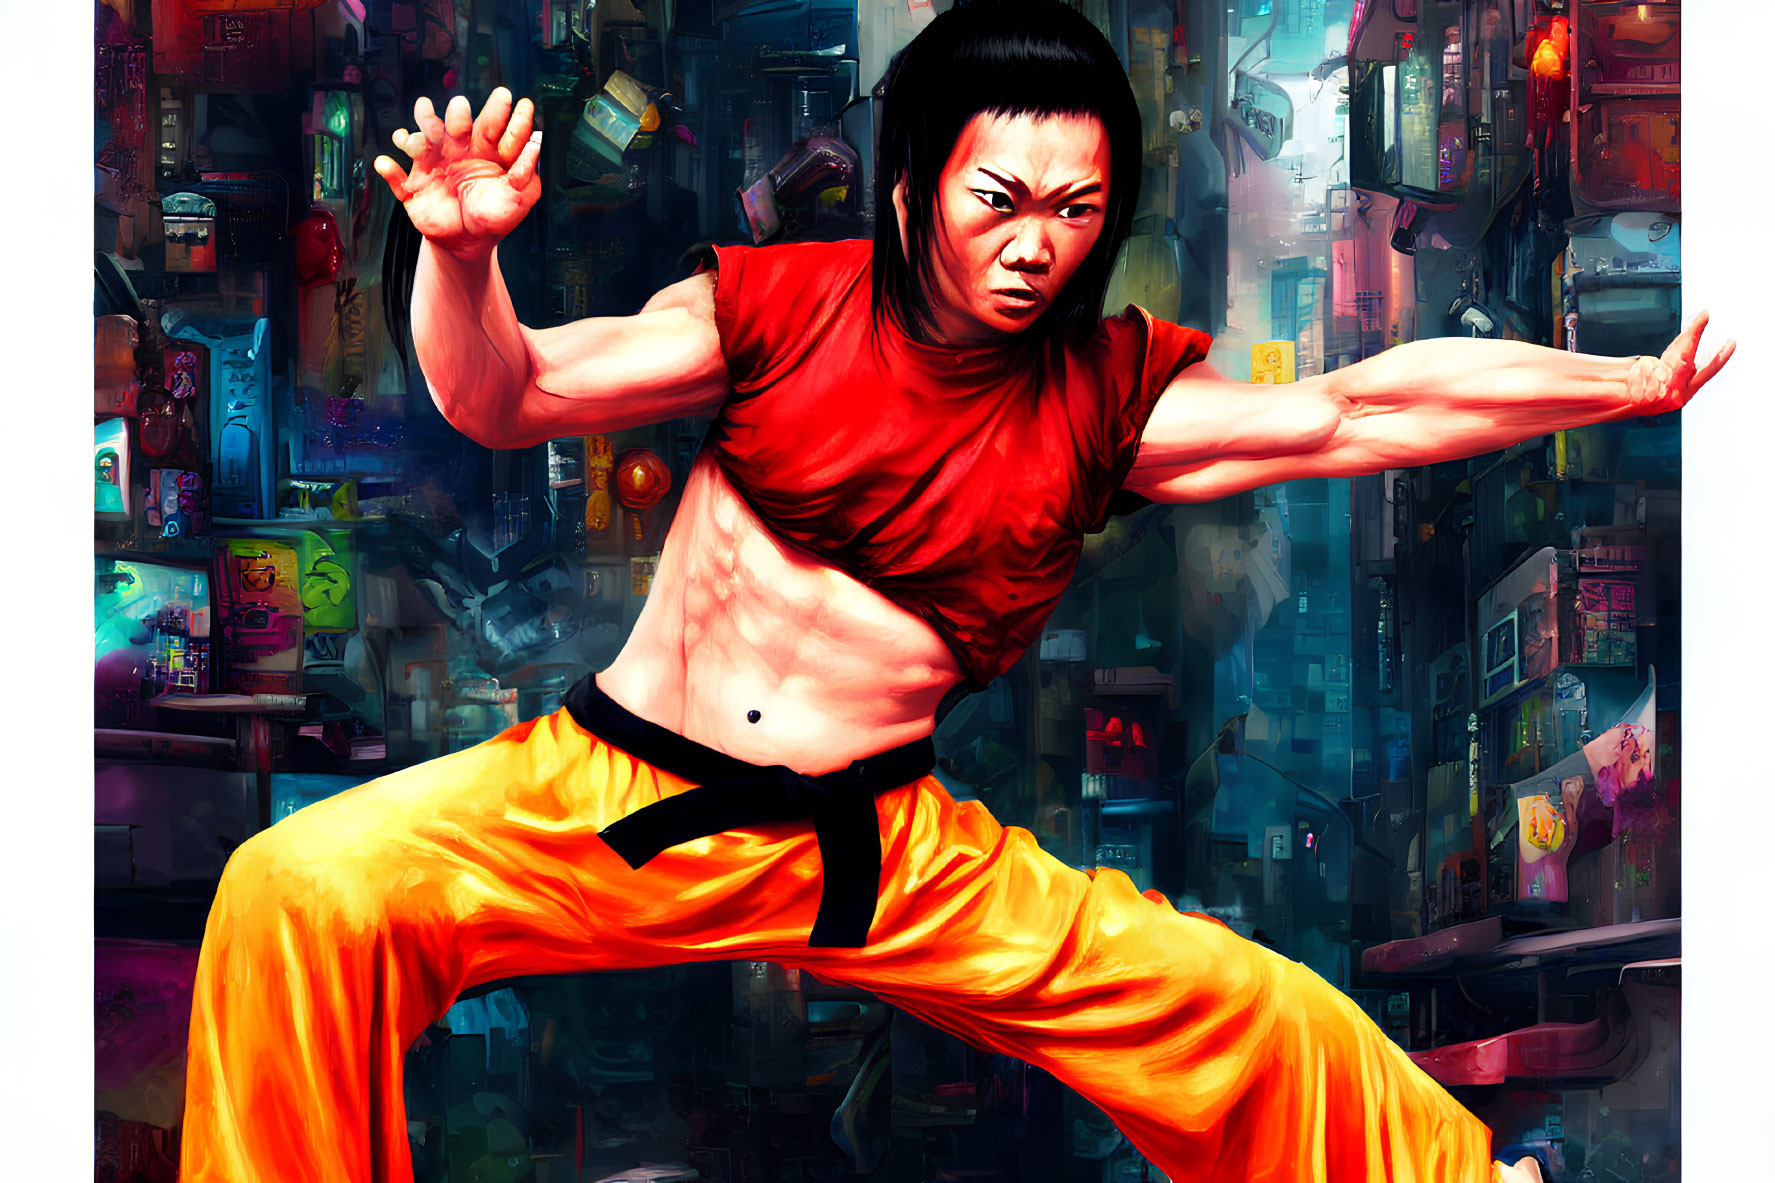 Digital illustration: Martial artist in red top and yellow pants striking kung fu pose in vibrant urban setting